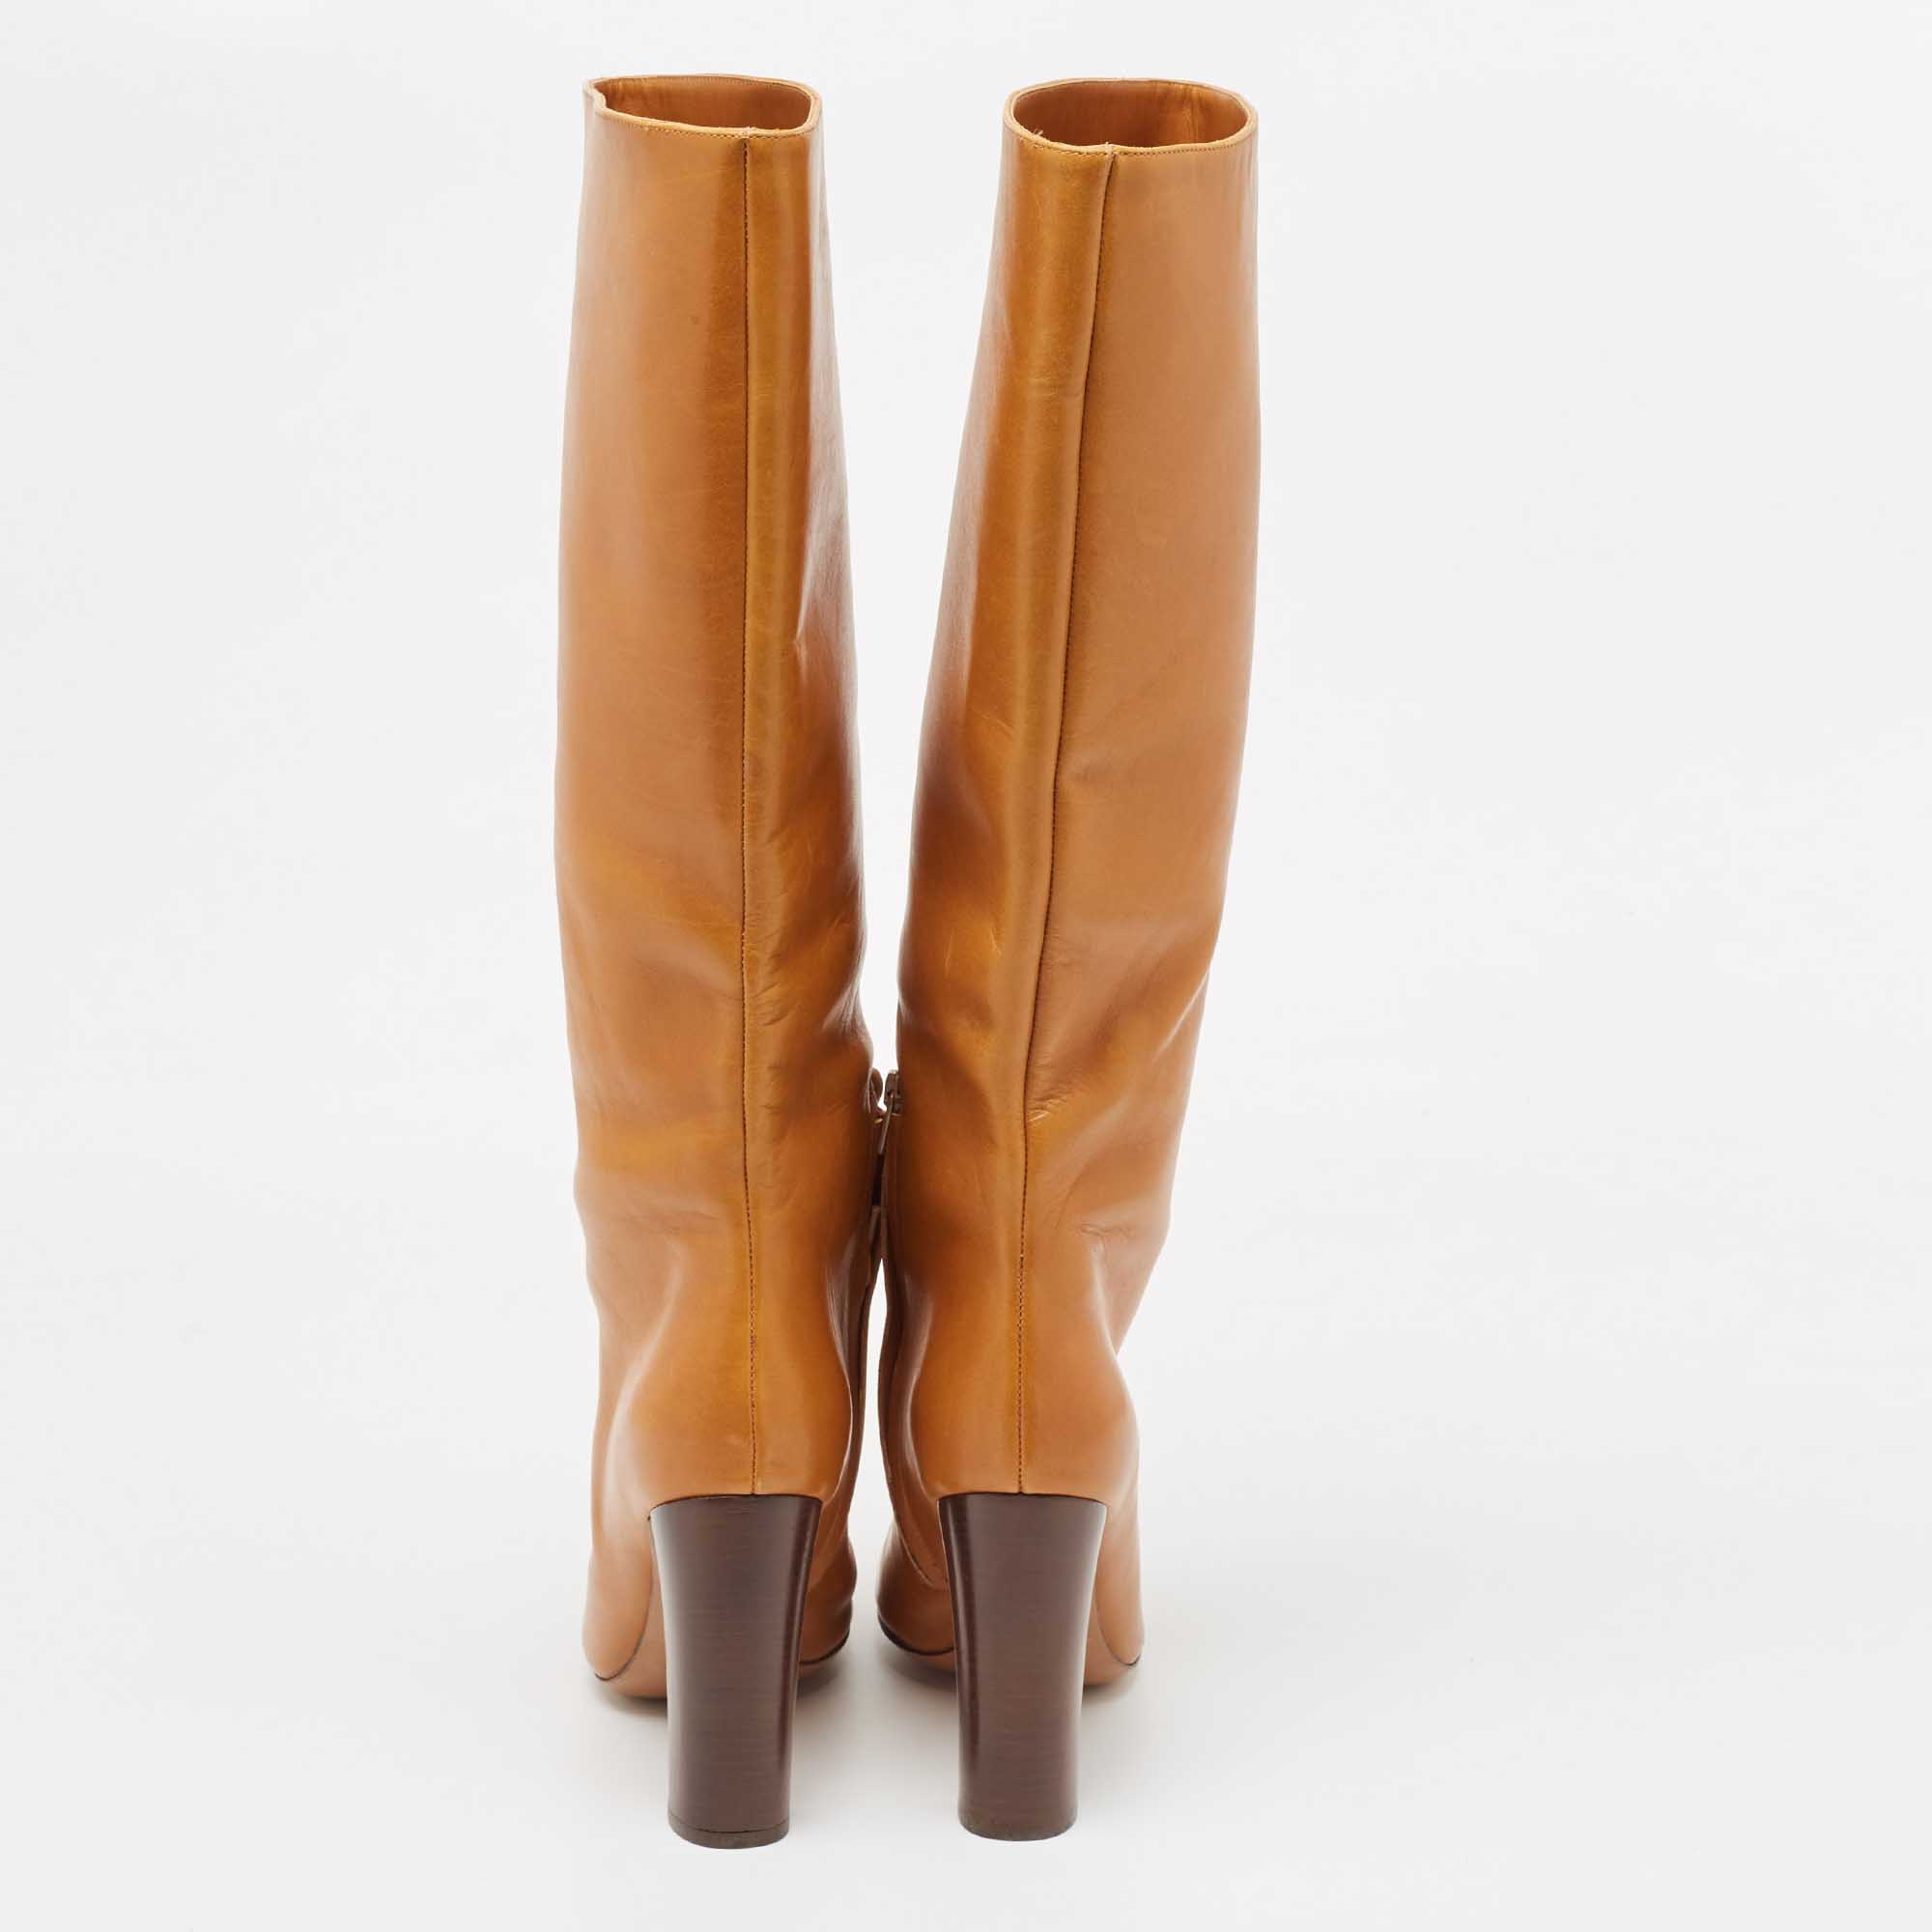 Chloe Brown Leather Knee Length Boots Size 41